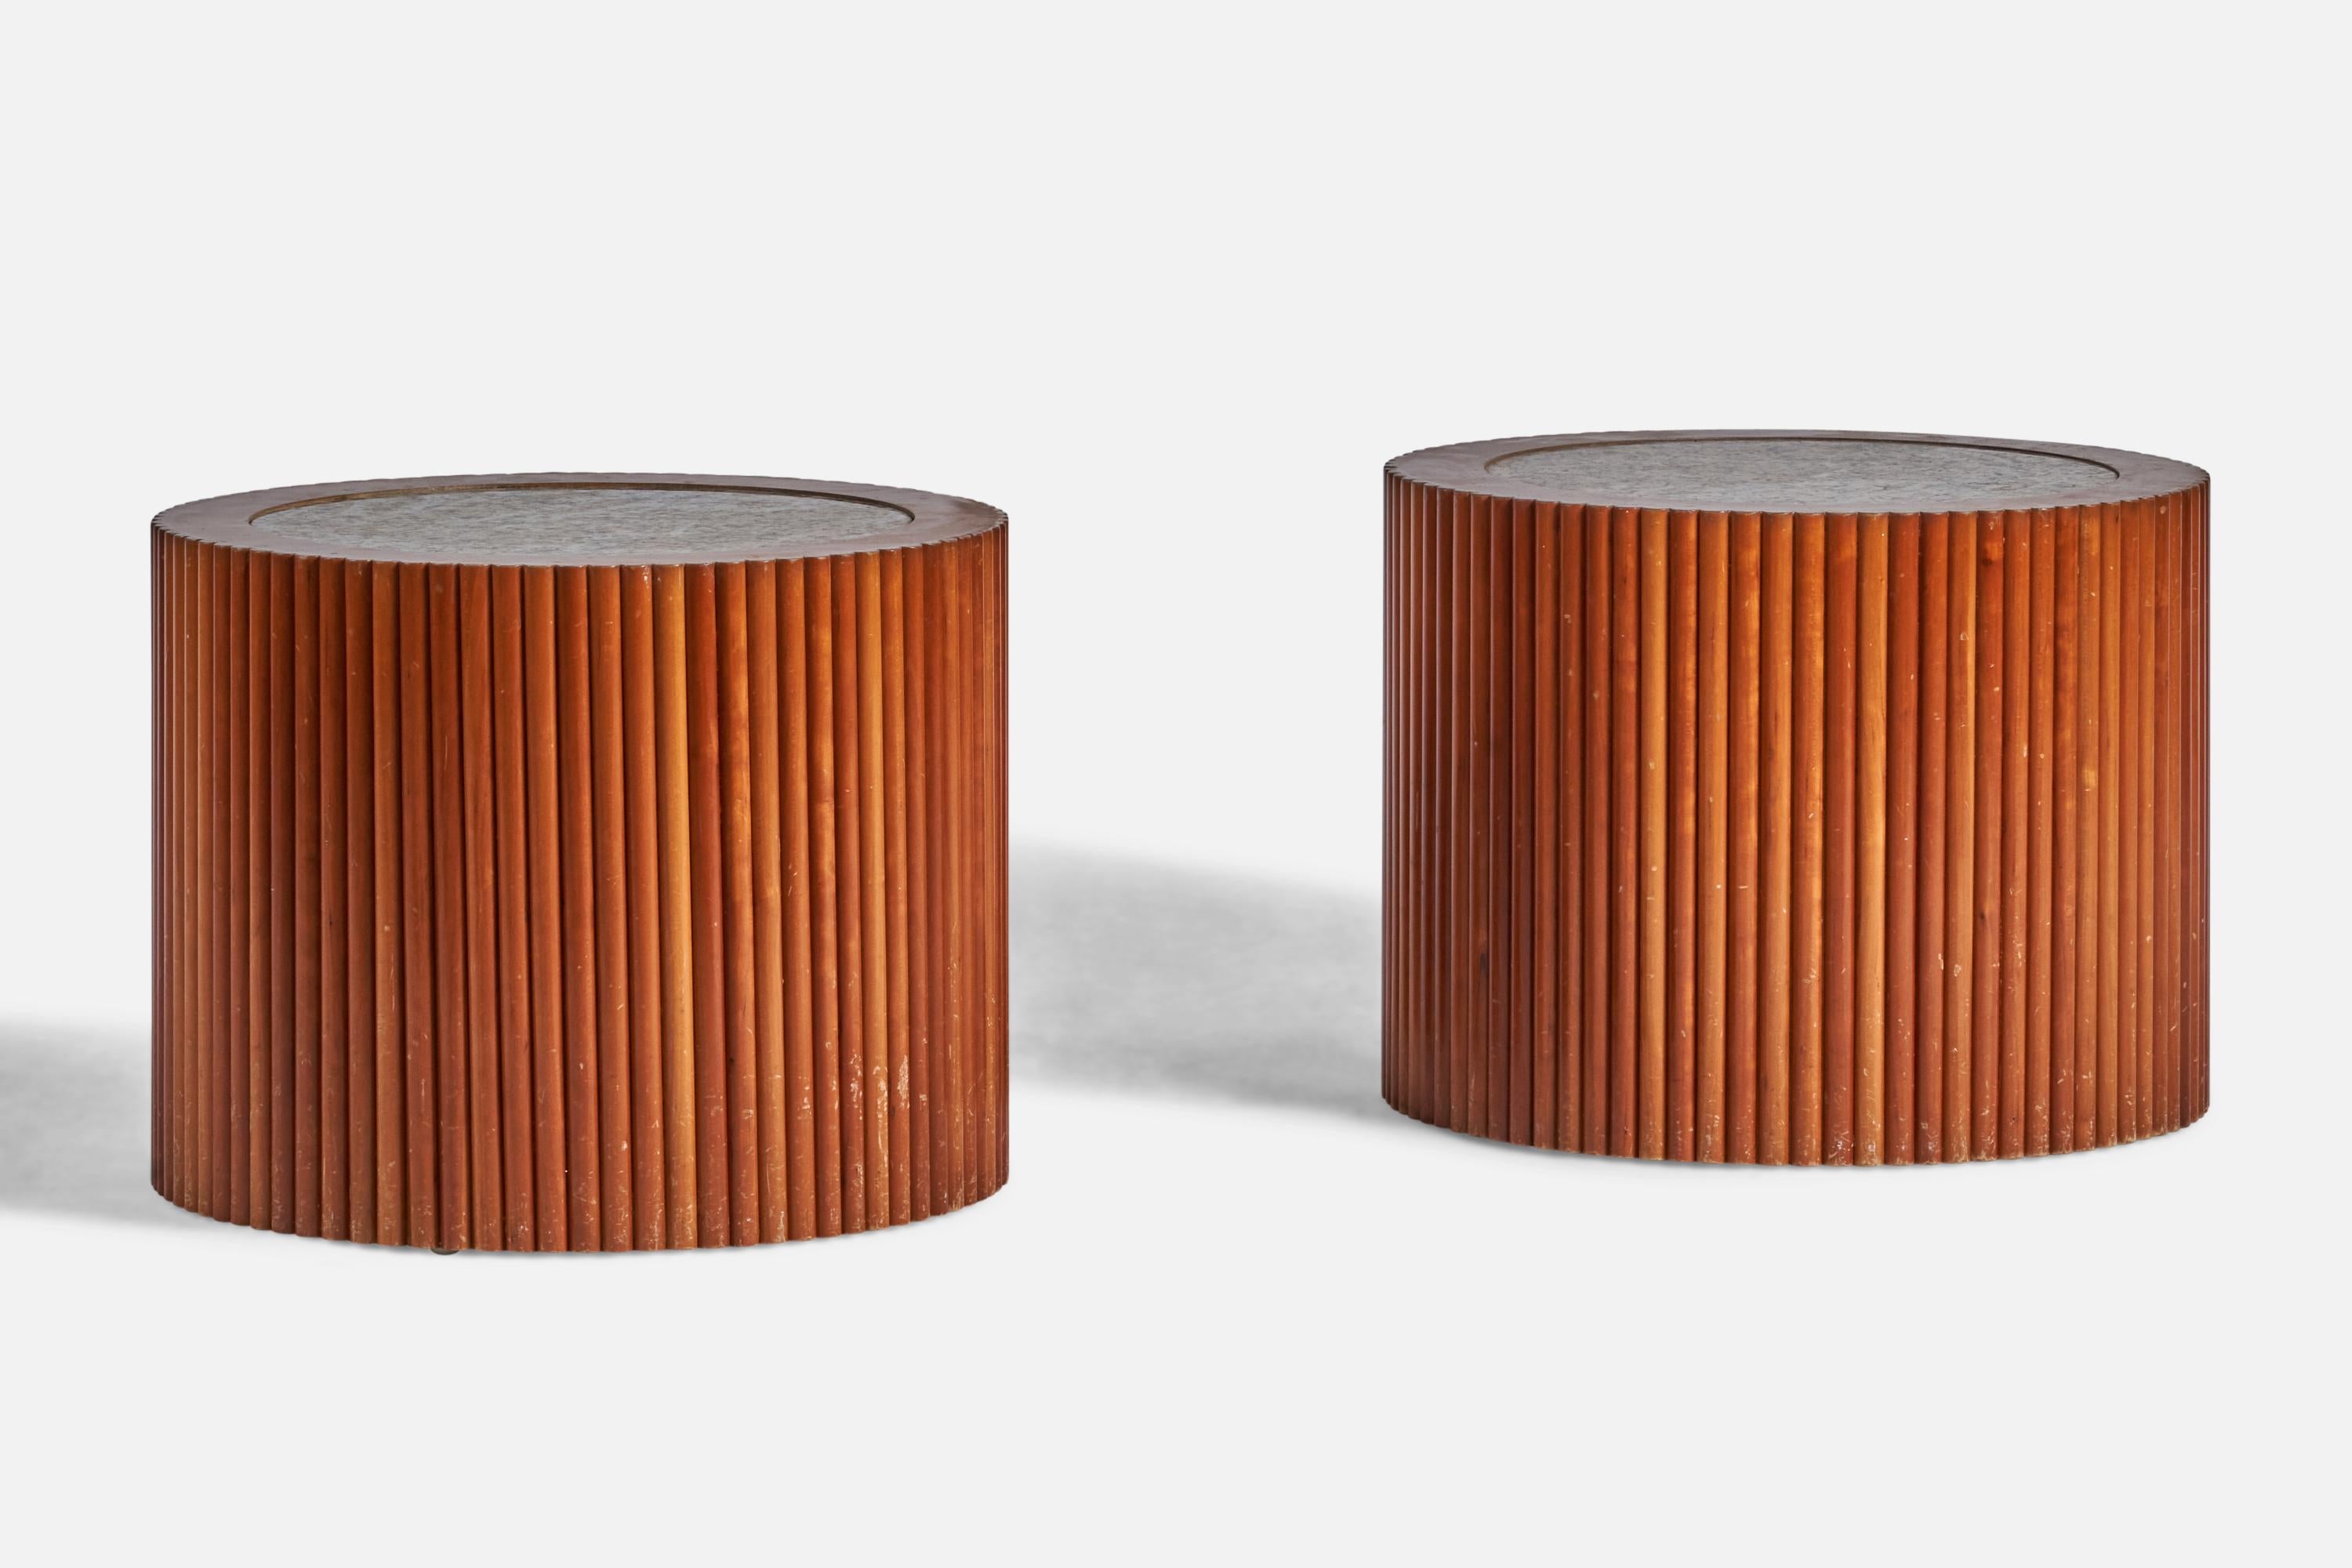 A pair of carved wood and granite side tables designed and produced in the US, c. 1970s.